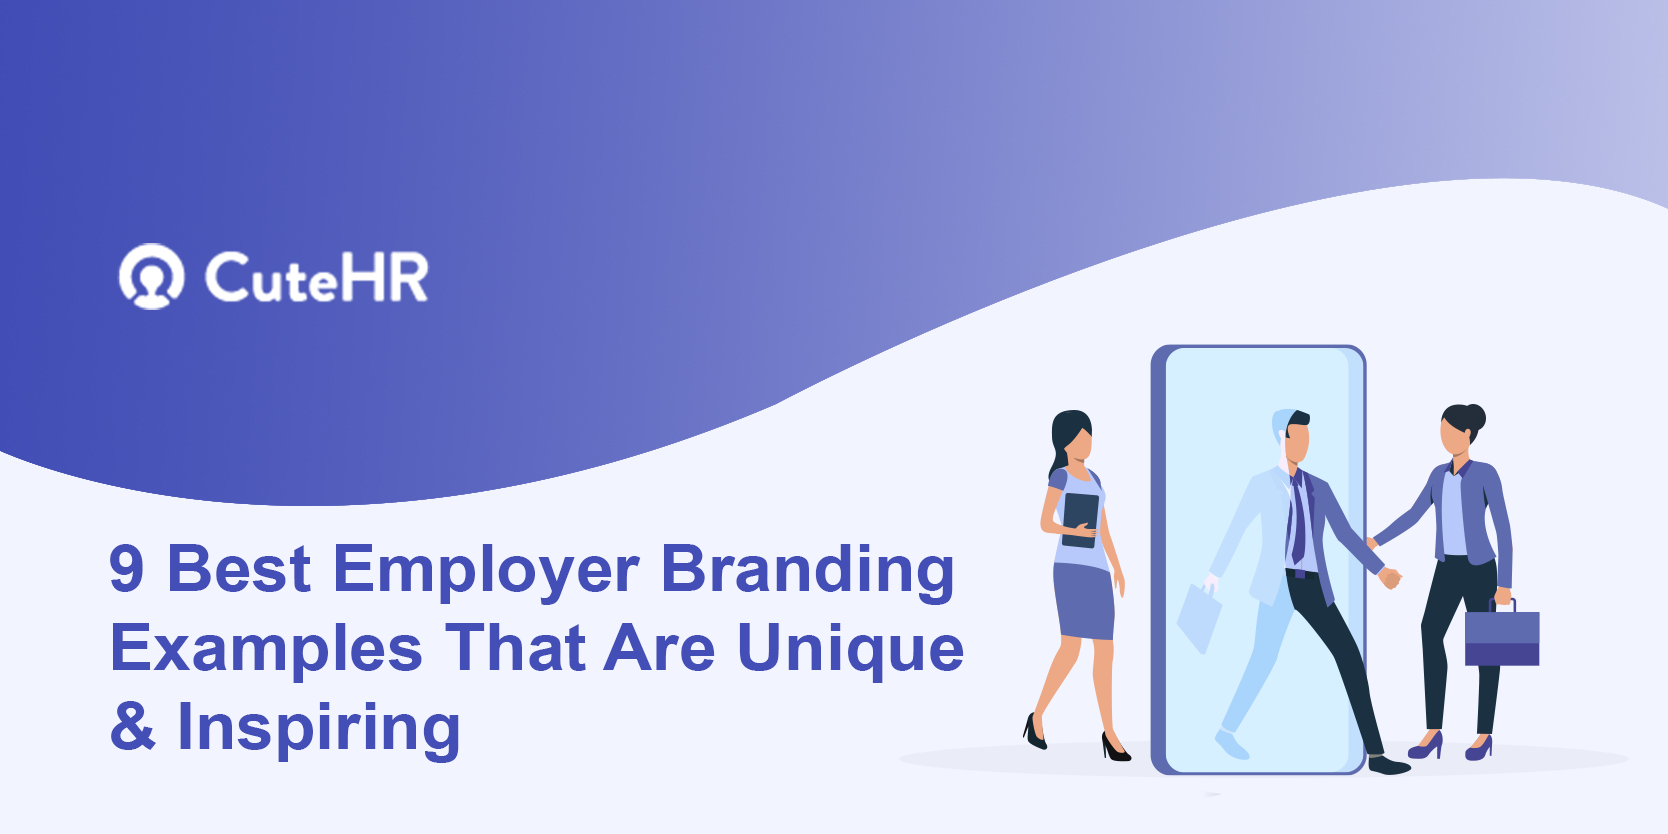 9 Best Employer Branding Examples That Are Unique & Inspiring